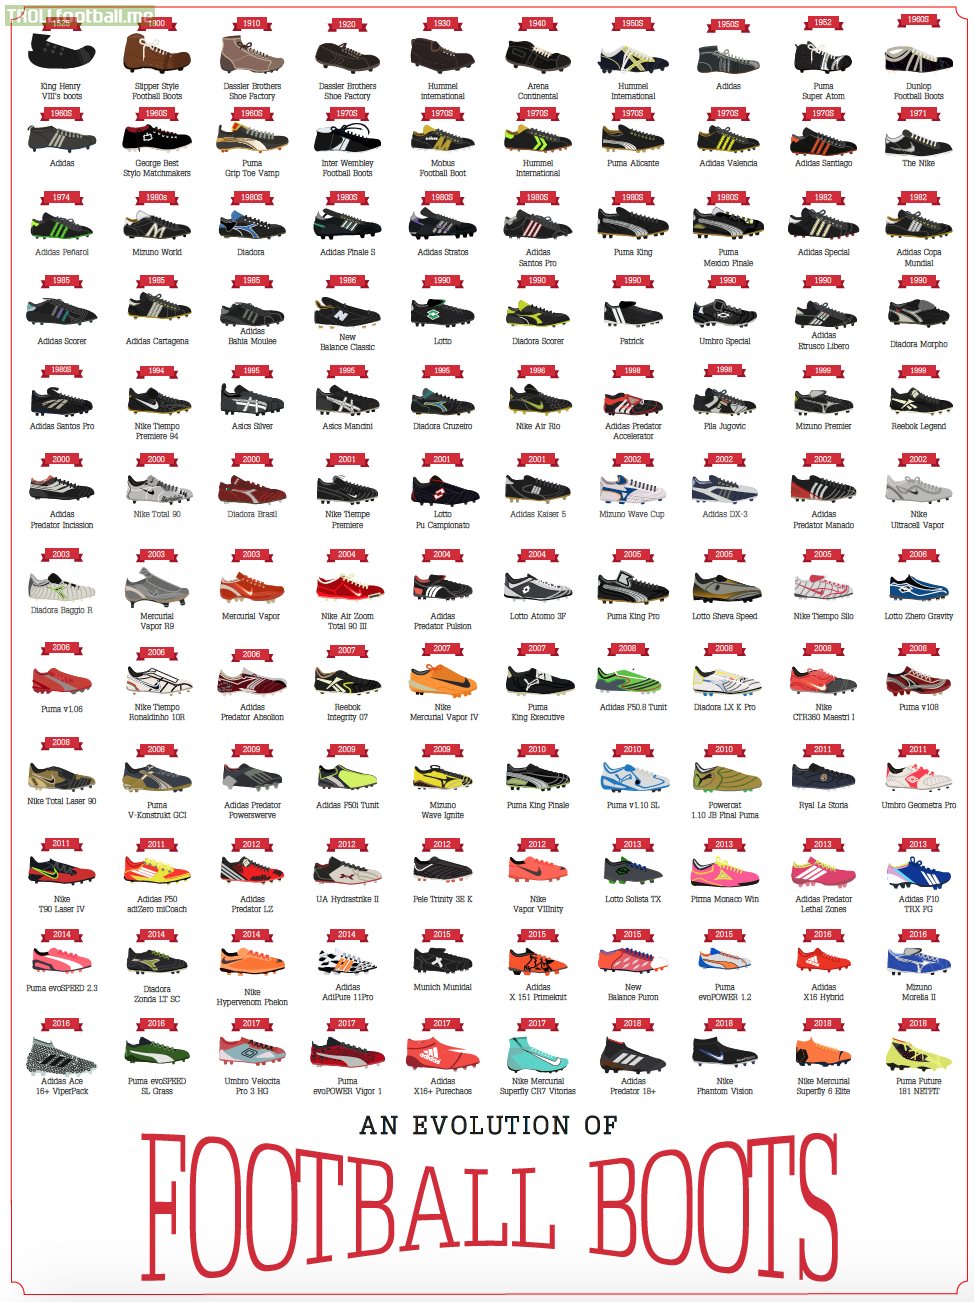 I made a poster charting the evolution of soccer cleats (15th century - 2018)